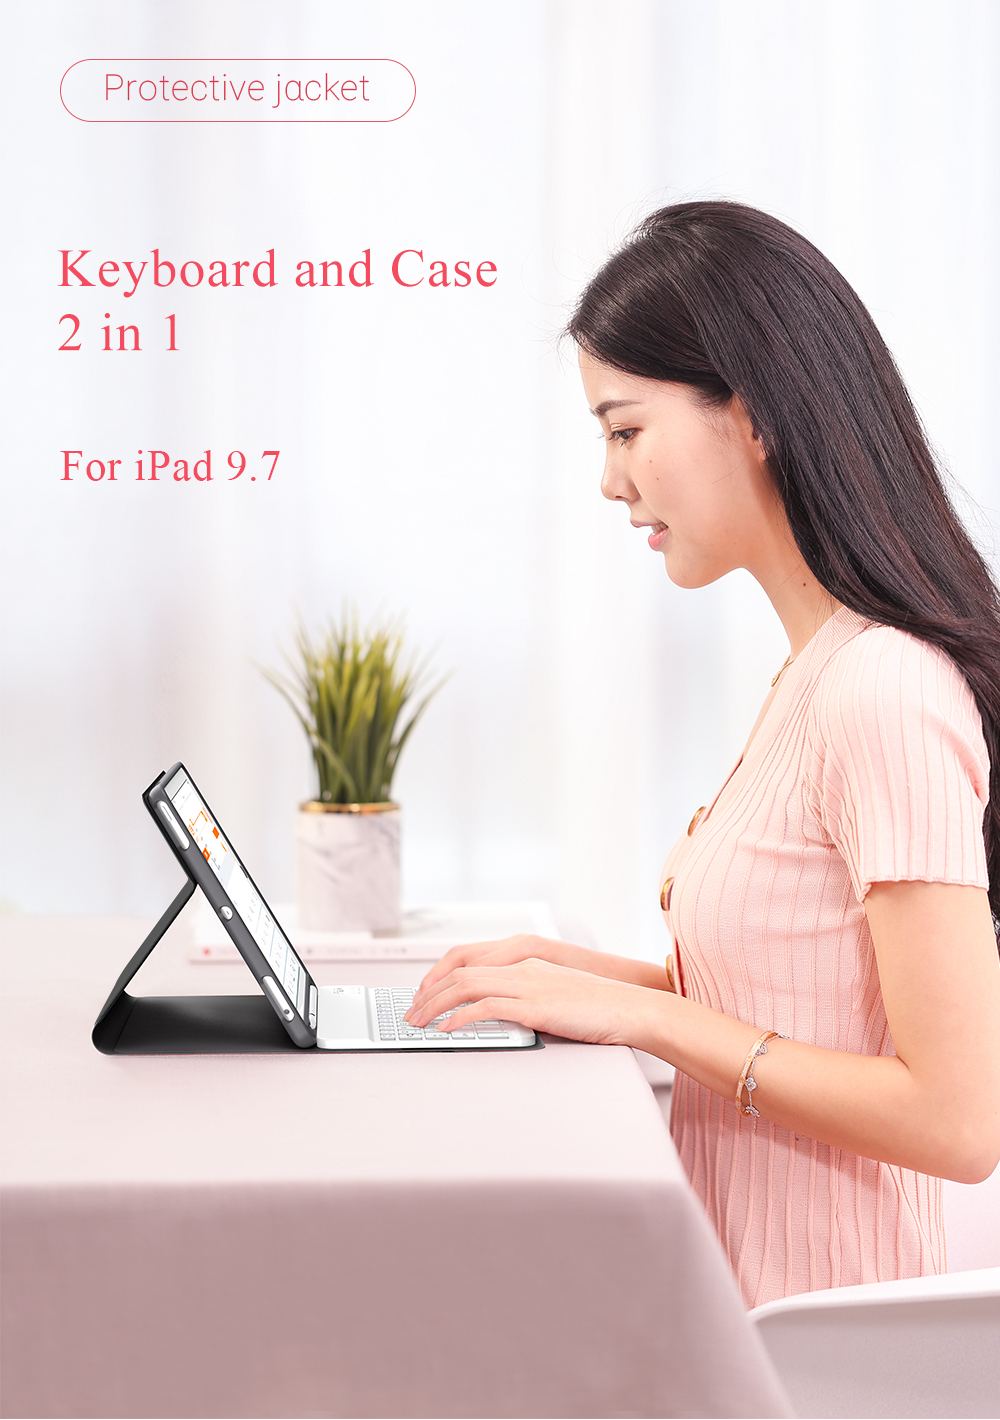 Auto Sleep Detachable bluetooth Wireless Keyboard Kickstand Tablet Case With Pencil Holder For iPad Pro 10.5 Inch 2017/iPad Air 10.5 Inch 2019 8